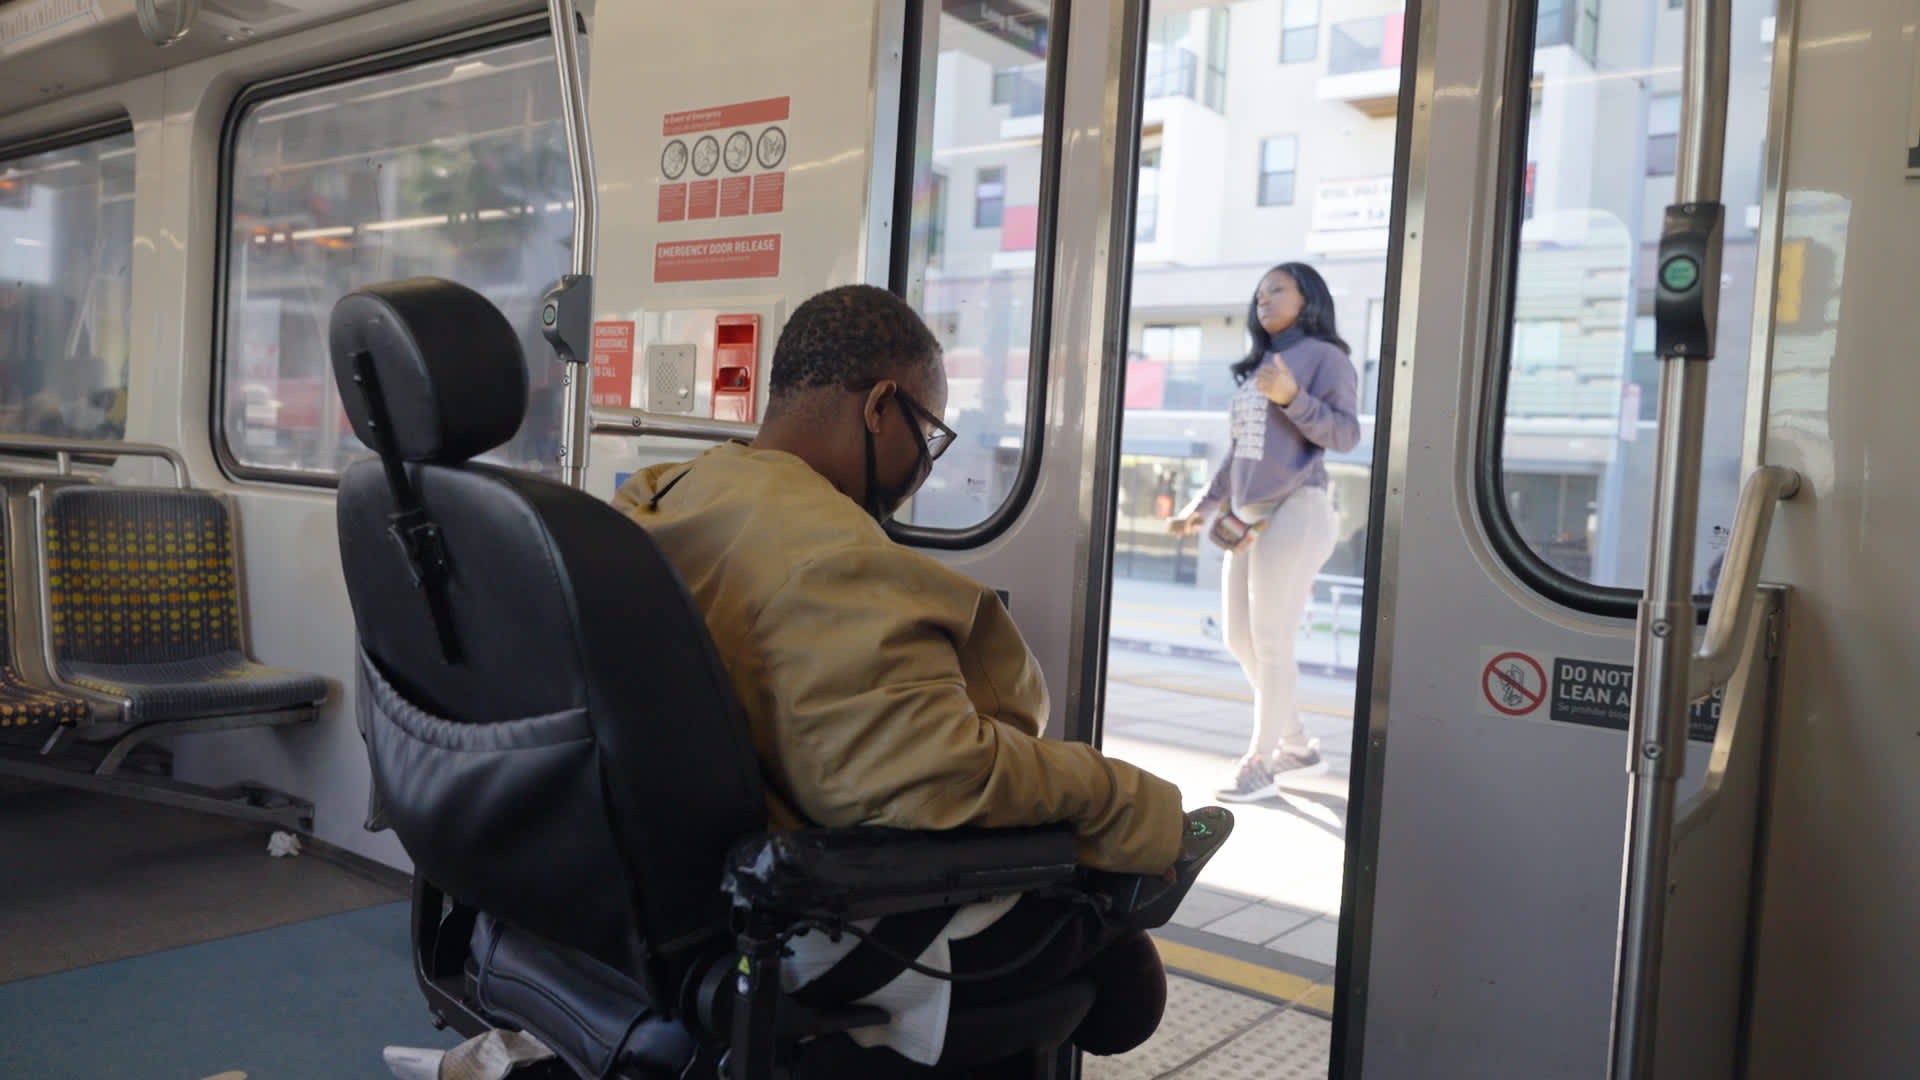 Simmons relies on public transportation to get around especially since she can't just fold up her wheelchair and get into a car.